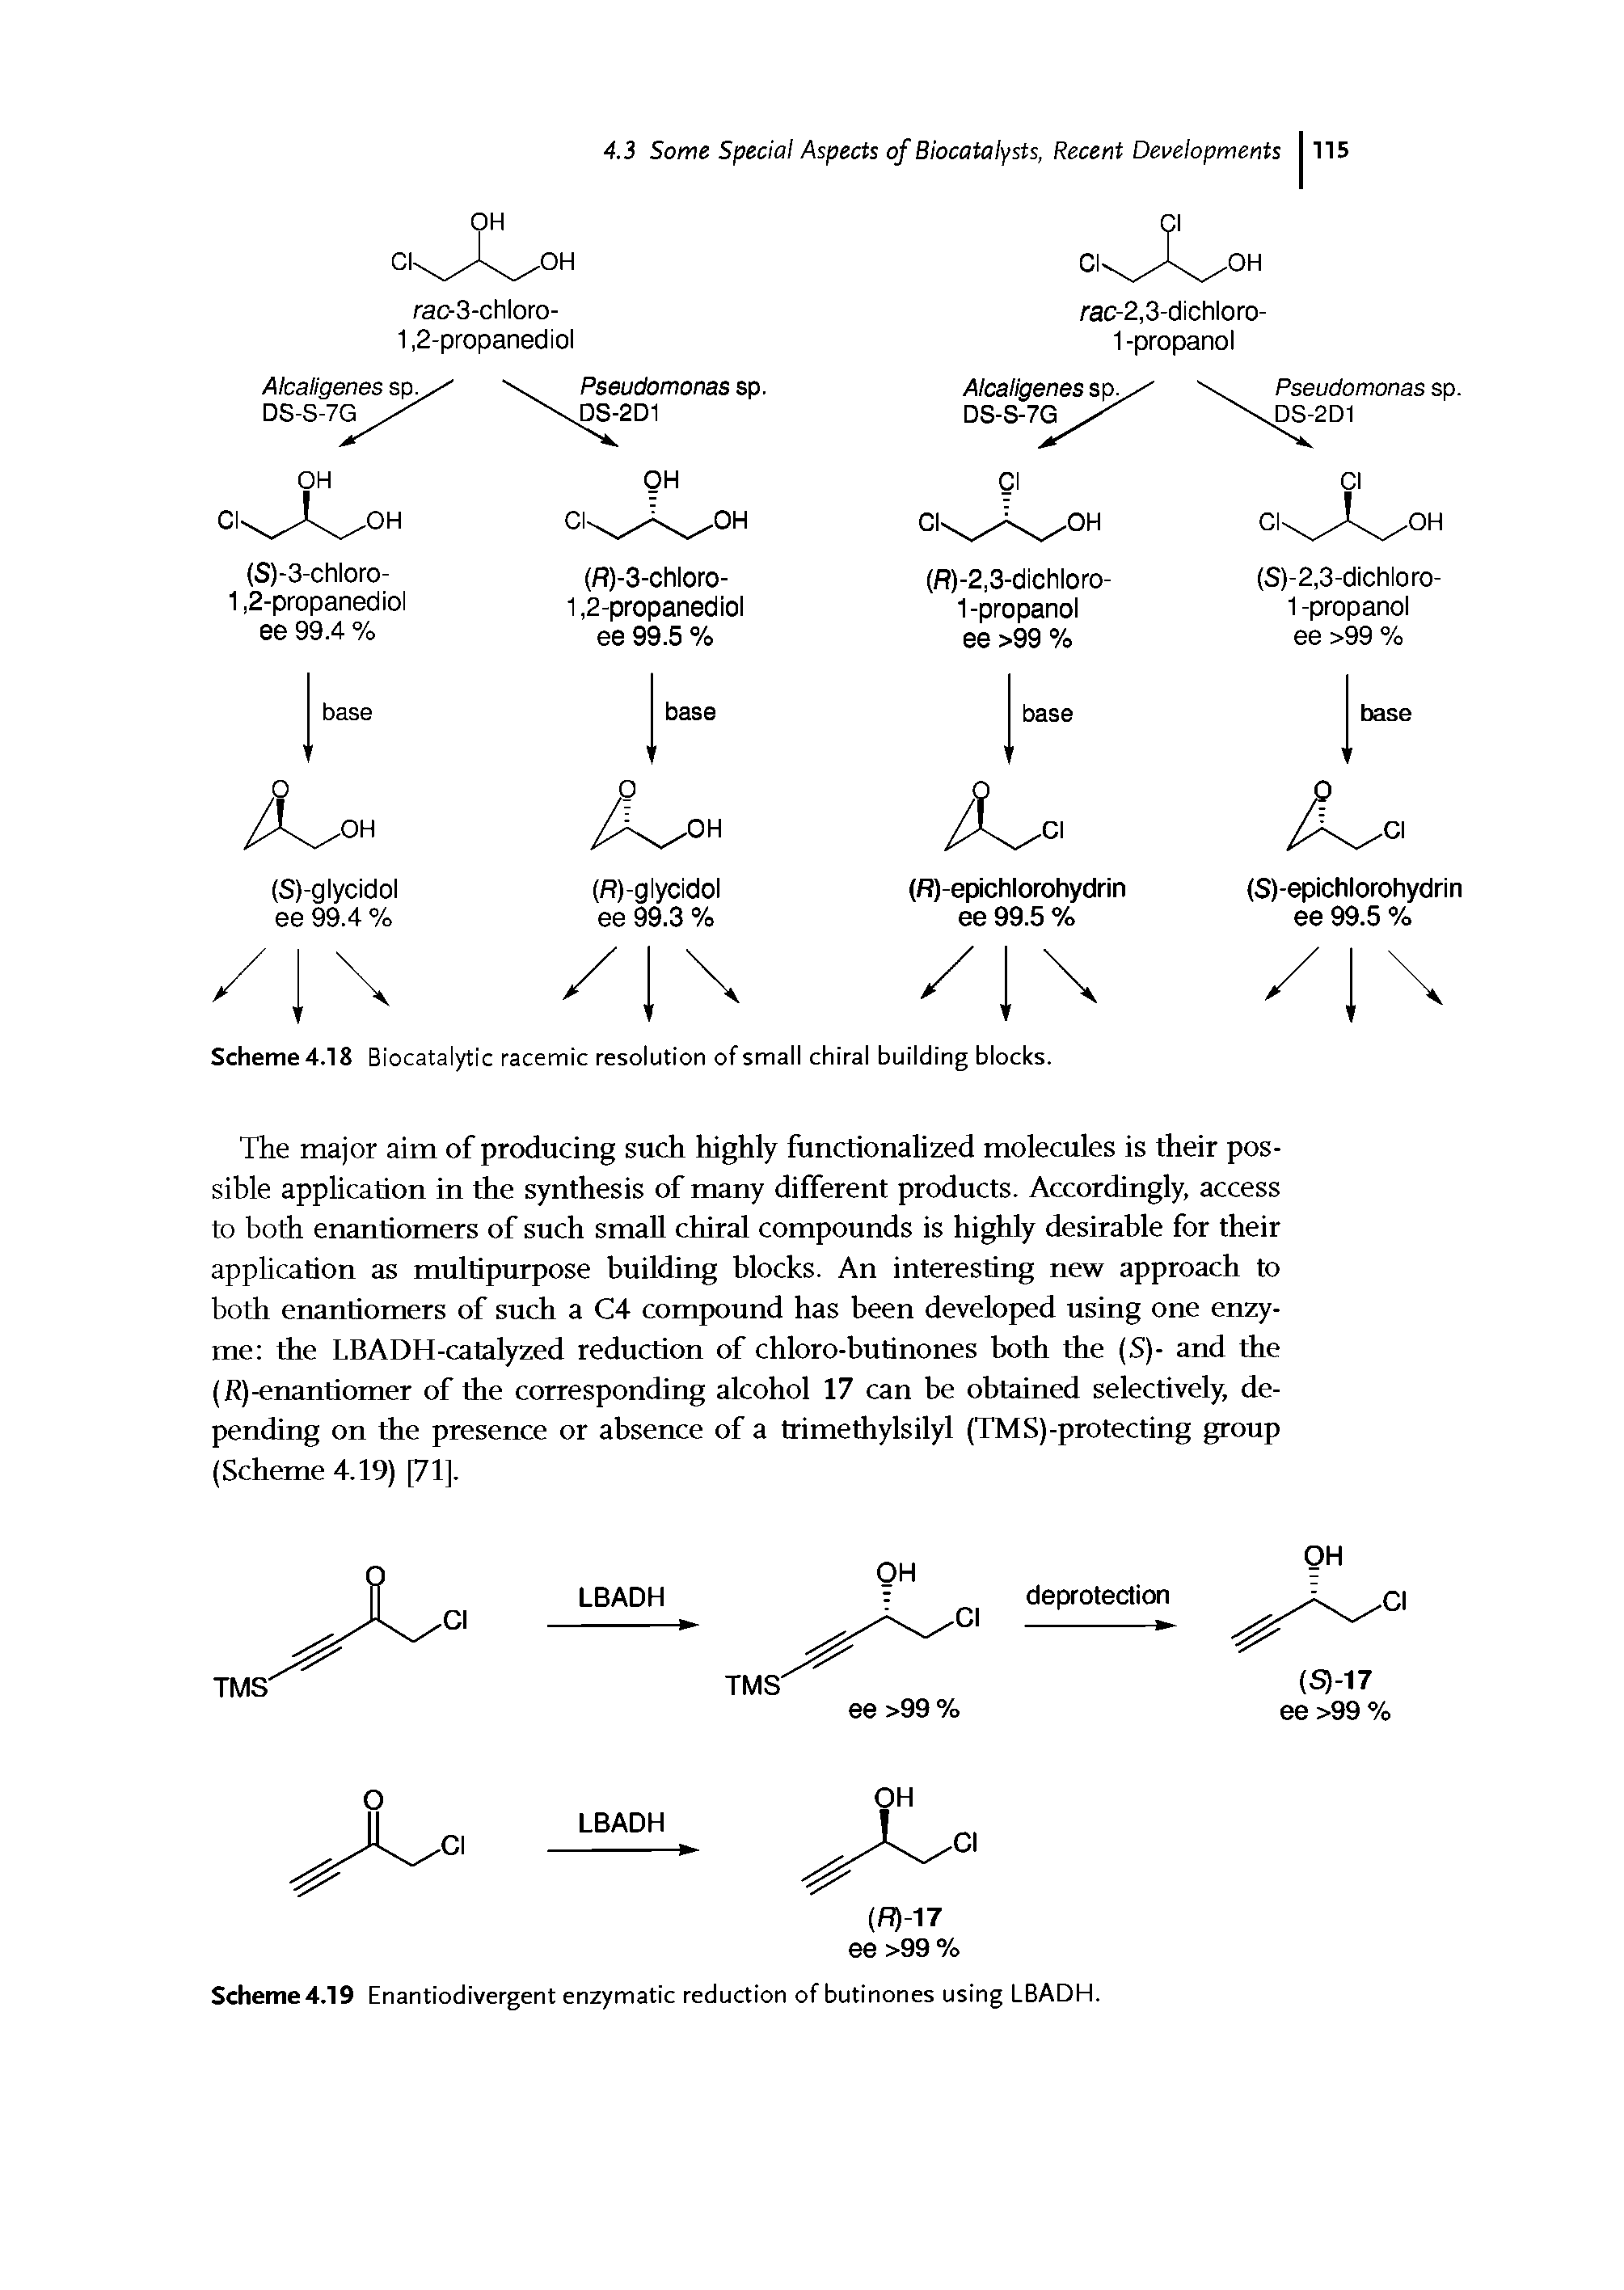 Scheme 4.18 Biocatalytic racemic resolution of small chiral building blocks.